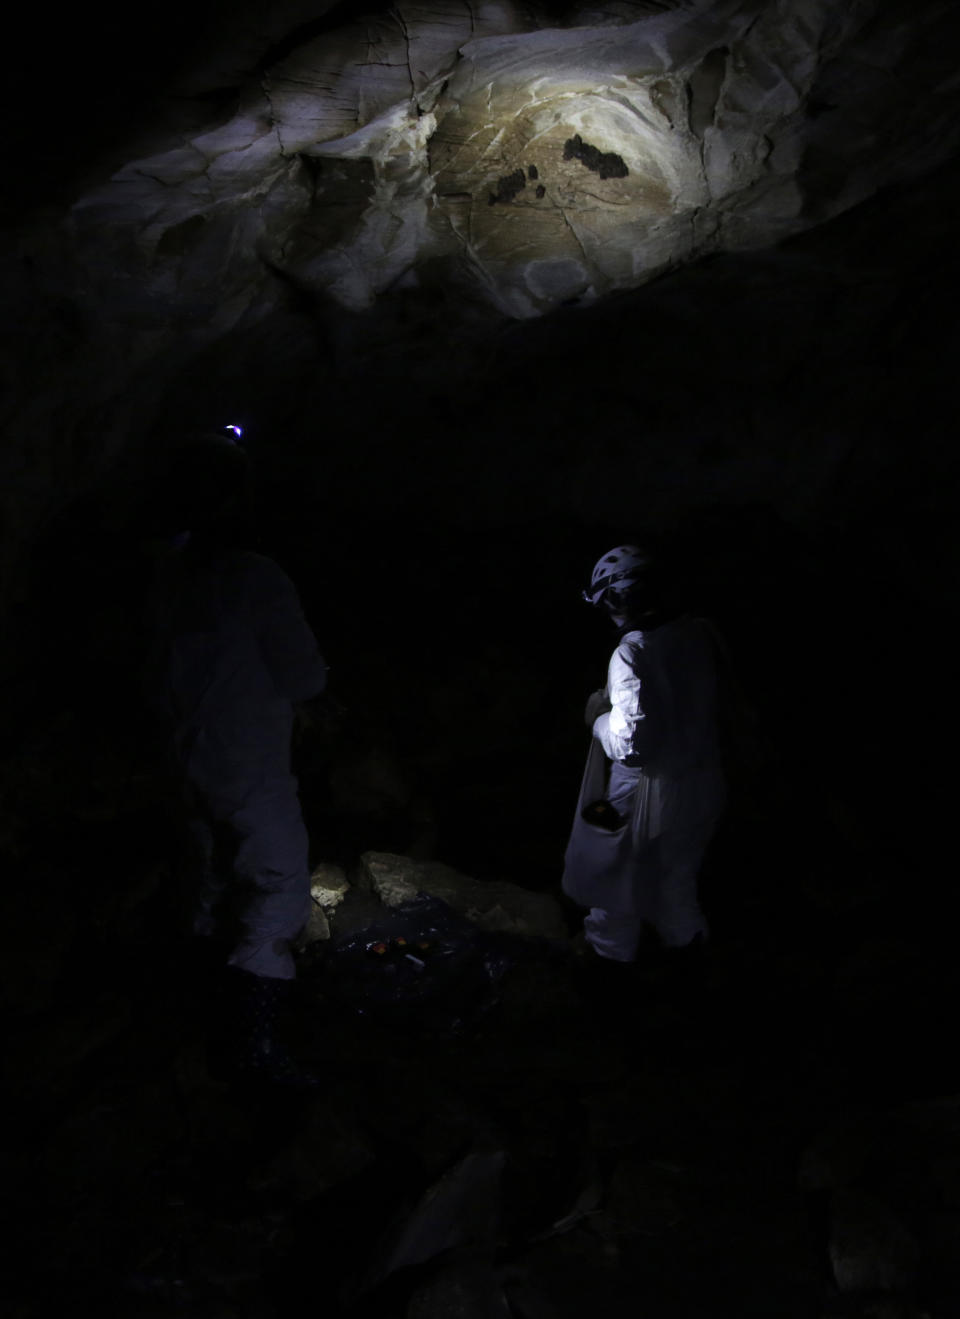 Researchers shine light on clusters of bats roosting in a cave in Dorset, Vt., on May 2, 2023. Scientists studying bat species hit hard by the fungus that causes white nose syndrome, which has killed millions of bats across North America, say more bats that hibernate at the Vermont cave are tolerating the disease and passing protective traits on to their young. (AP Photo/Hasan Jamali)